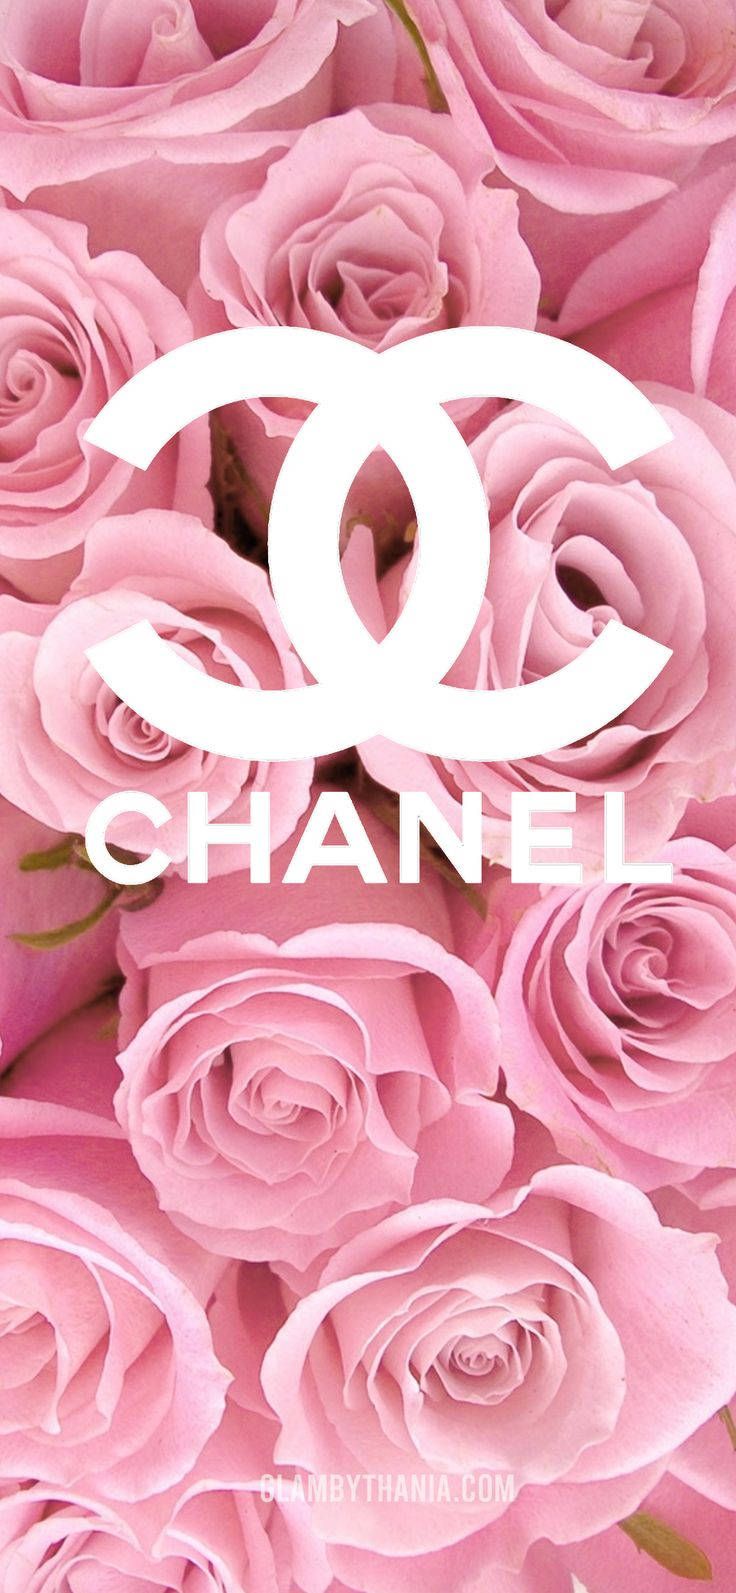 A Chanel wallpaper for your phone! - Chanel